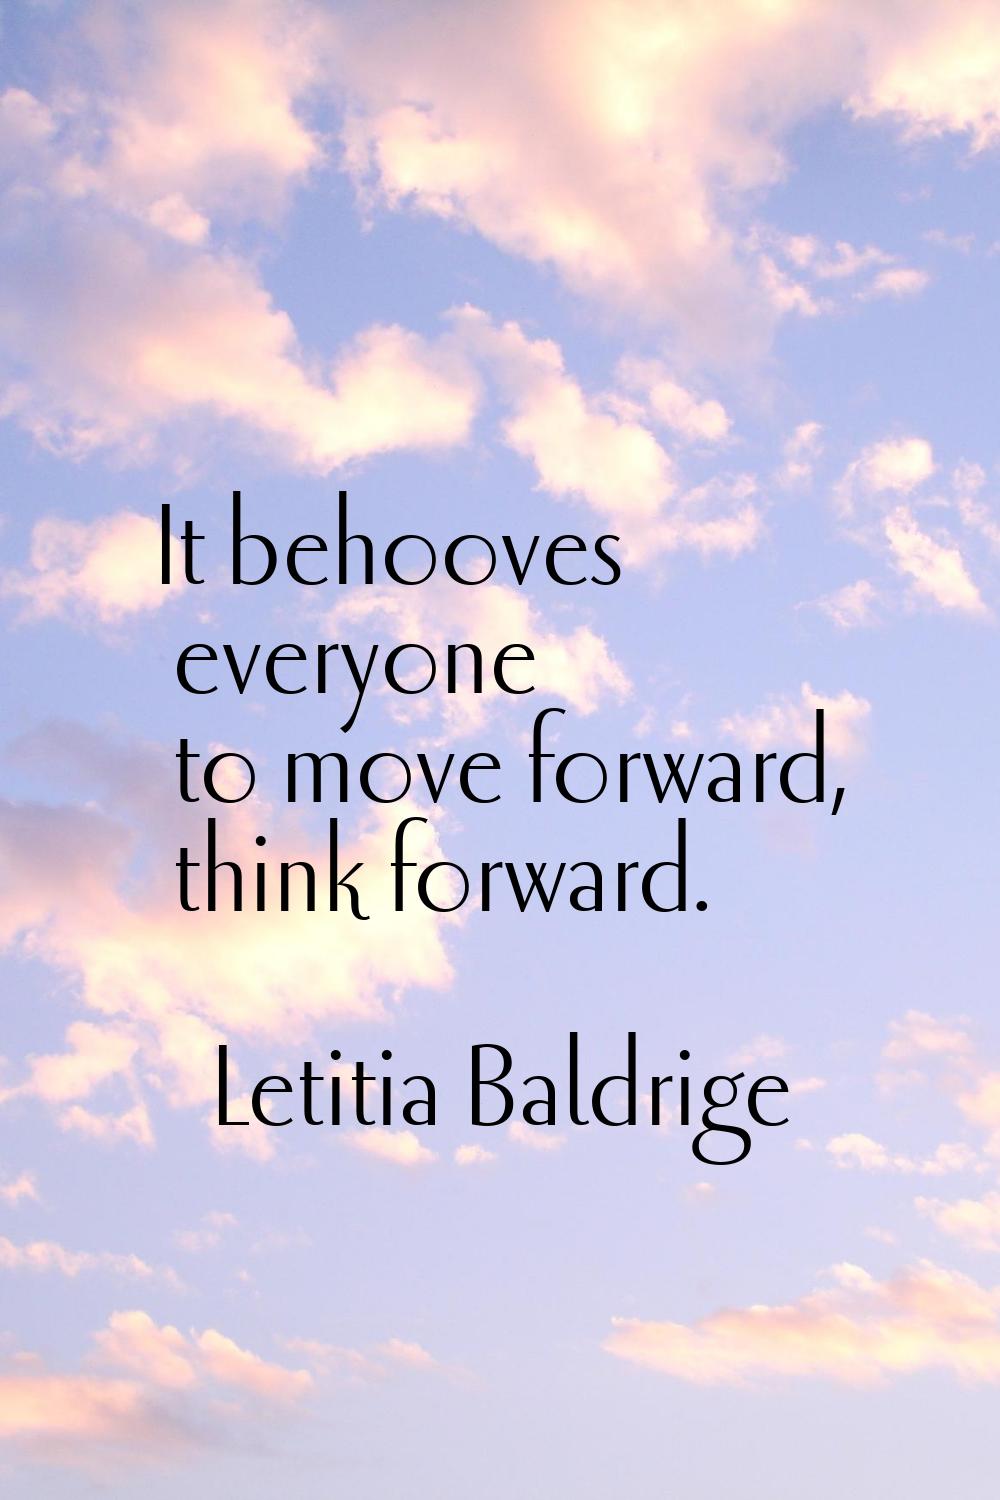 It behooves everyone to move forward, think forward.